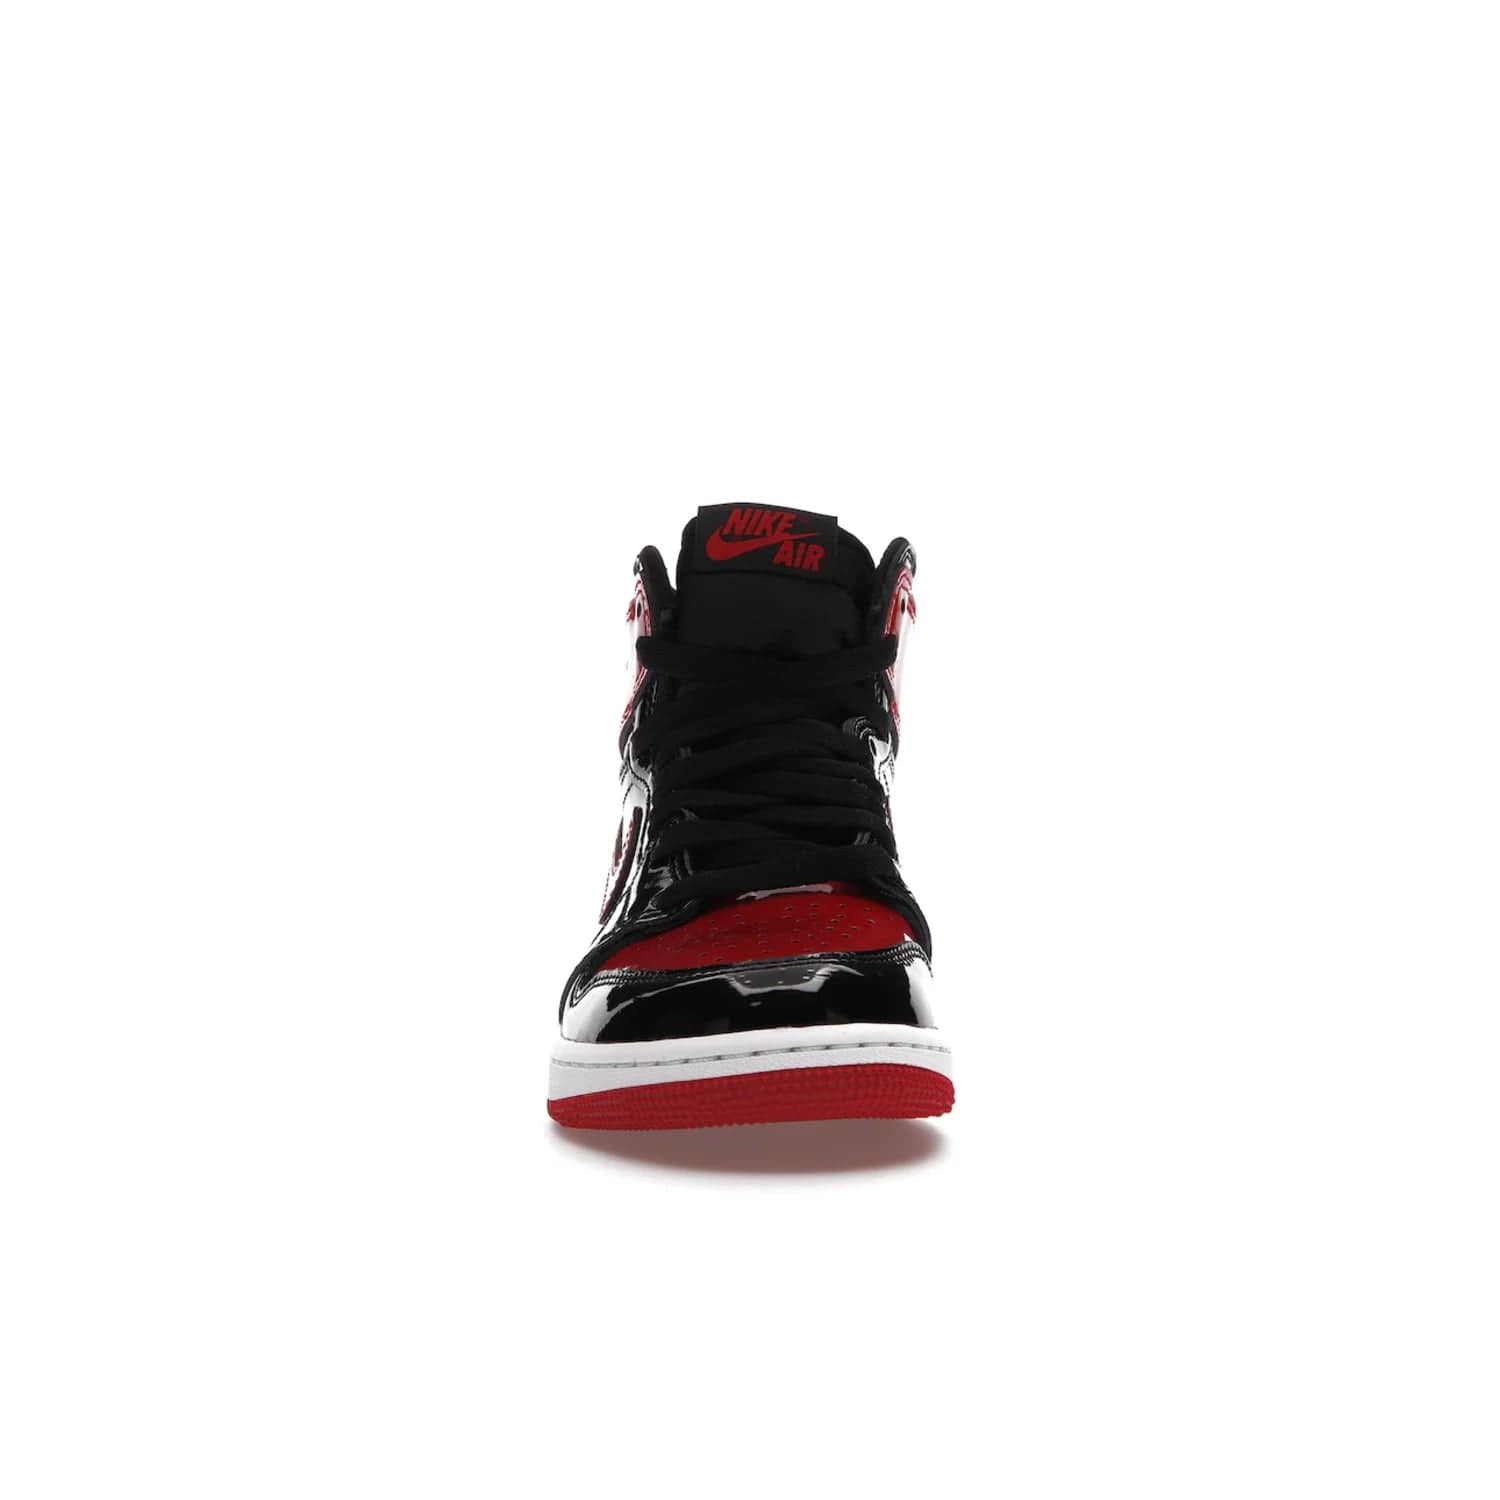 Jordan 1 Retro High OG Patent Bred (GS) - Image 10 - Only at www.BallersClubKickz.com - Upgrade your sneaker game with the iconic Air Jordan 1 Retro High OG Bred Patent GS. Crafted with premium patent leather and basketball-inspired details for a classic look, they also feature an encapsulated Air-sole cushioning and enhanced red rubber outsole. Don't miss this timeless sneaker with a striking black, white, and varsity red colorway, dropping December 2021.